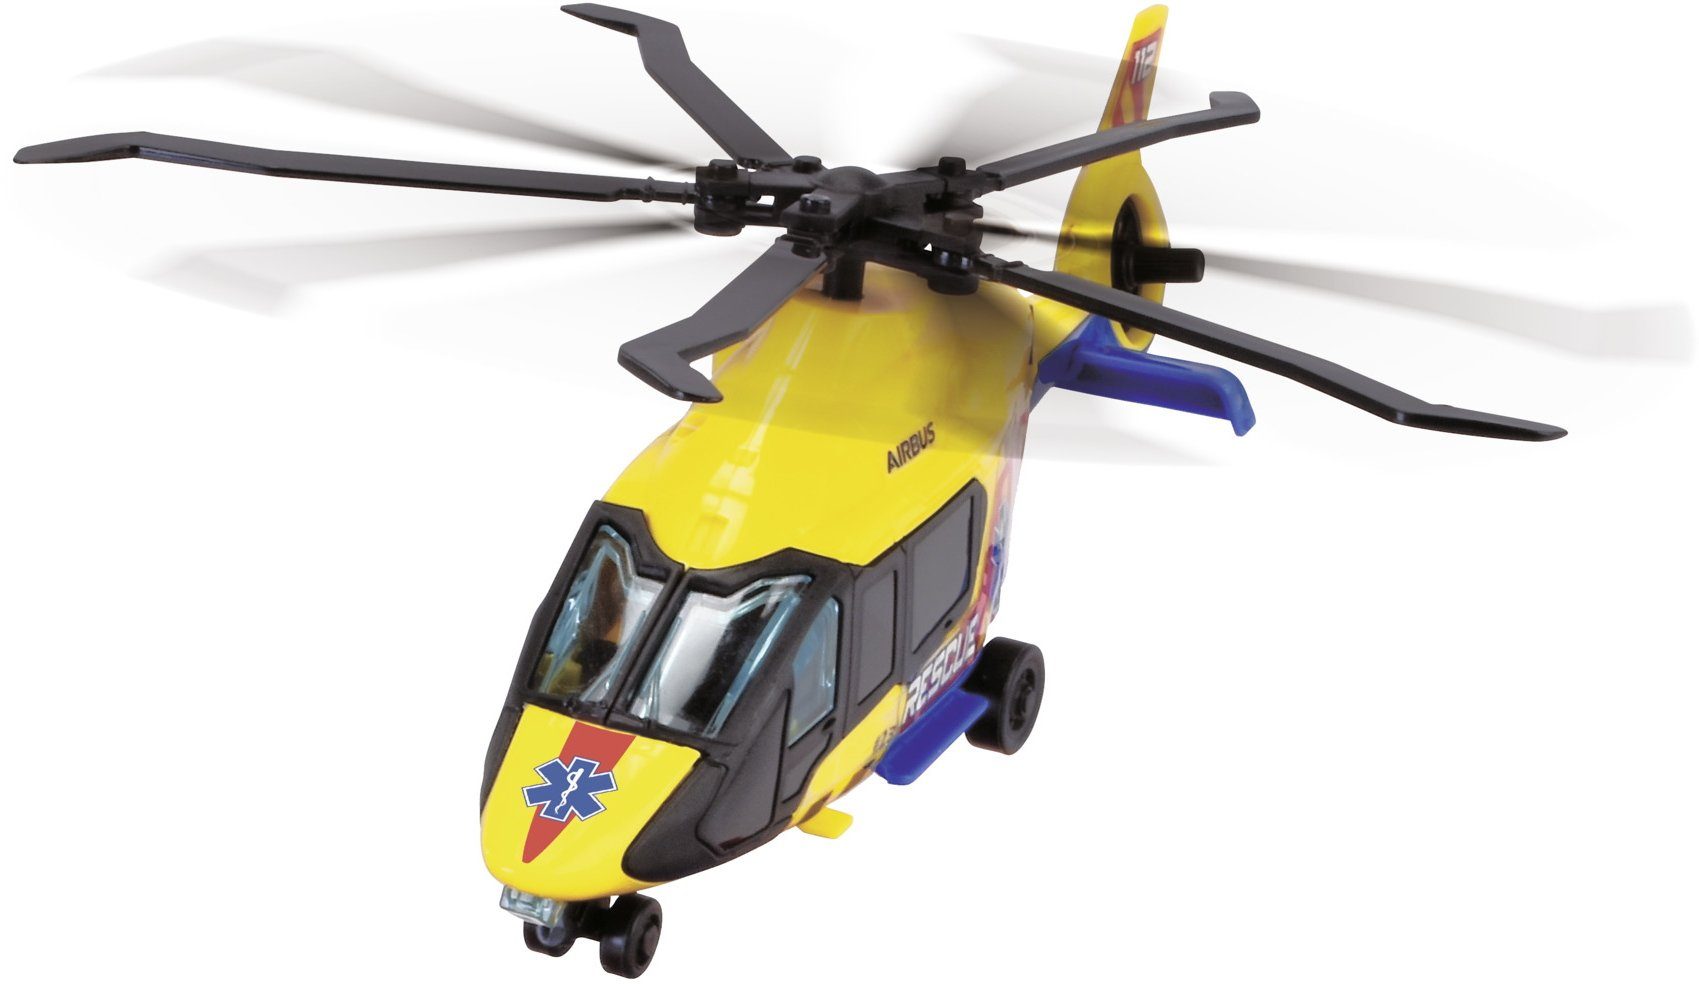 203714022 Toys Helicopter / Real Go Spielzeug-Hubschrauber Airbus SOS Rescue Helikopter H160 Dickie